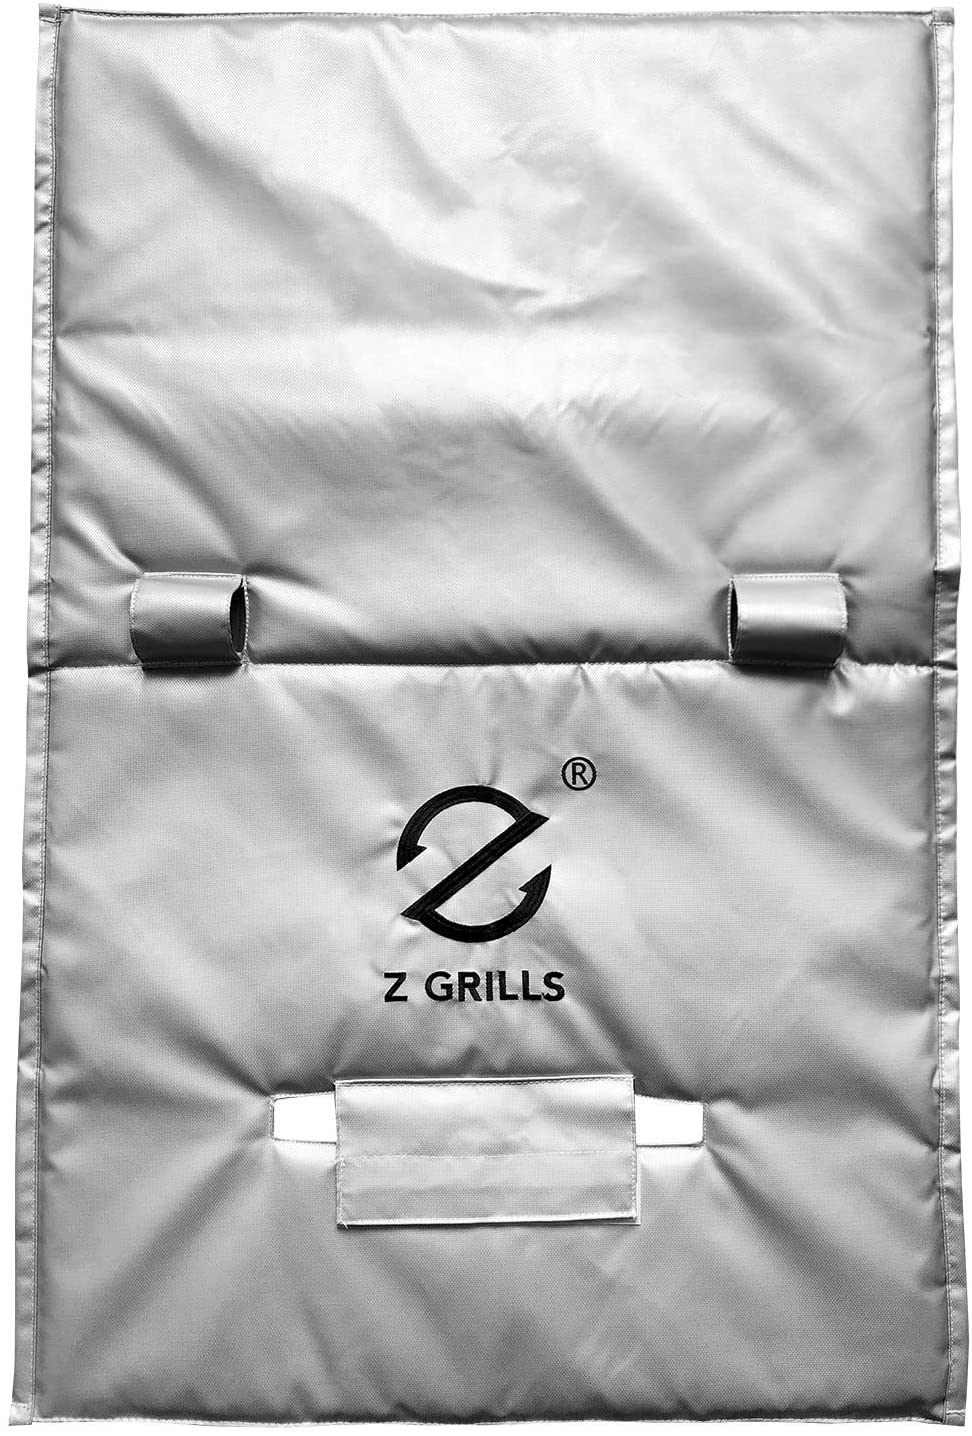 Z GRILLS Thermal Blanket for ZPG 550A -Keep Consistent temperatures & Save Pellet-Enjoy BBQ All Year Round Even Cold Winter - image 5 of 7